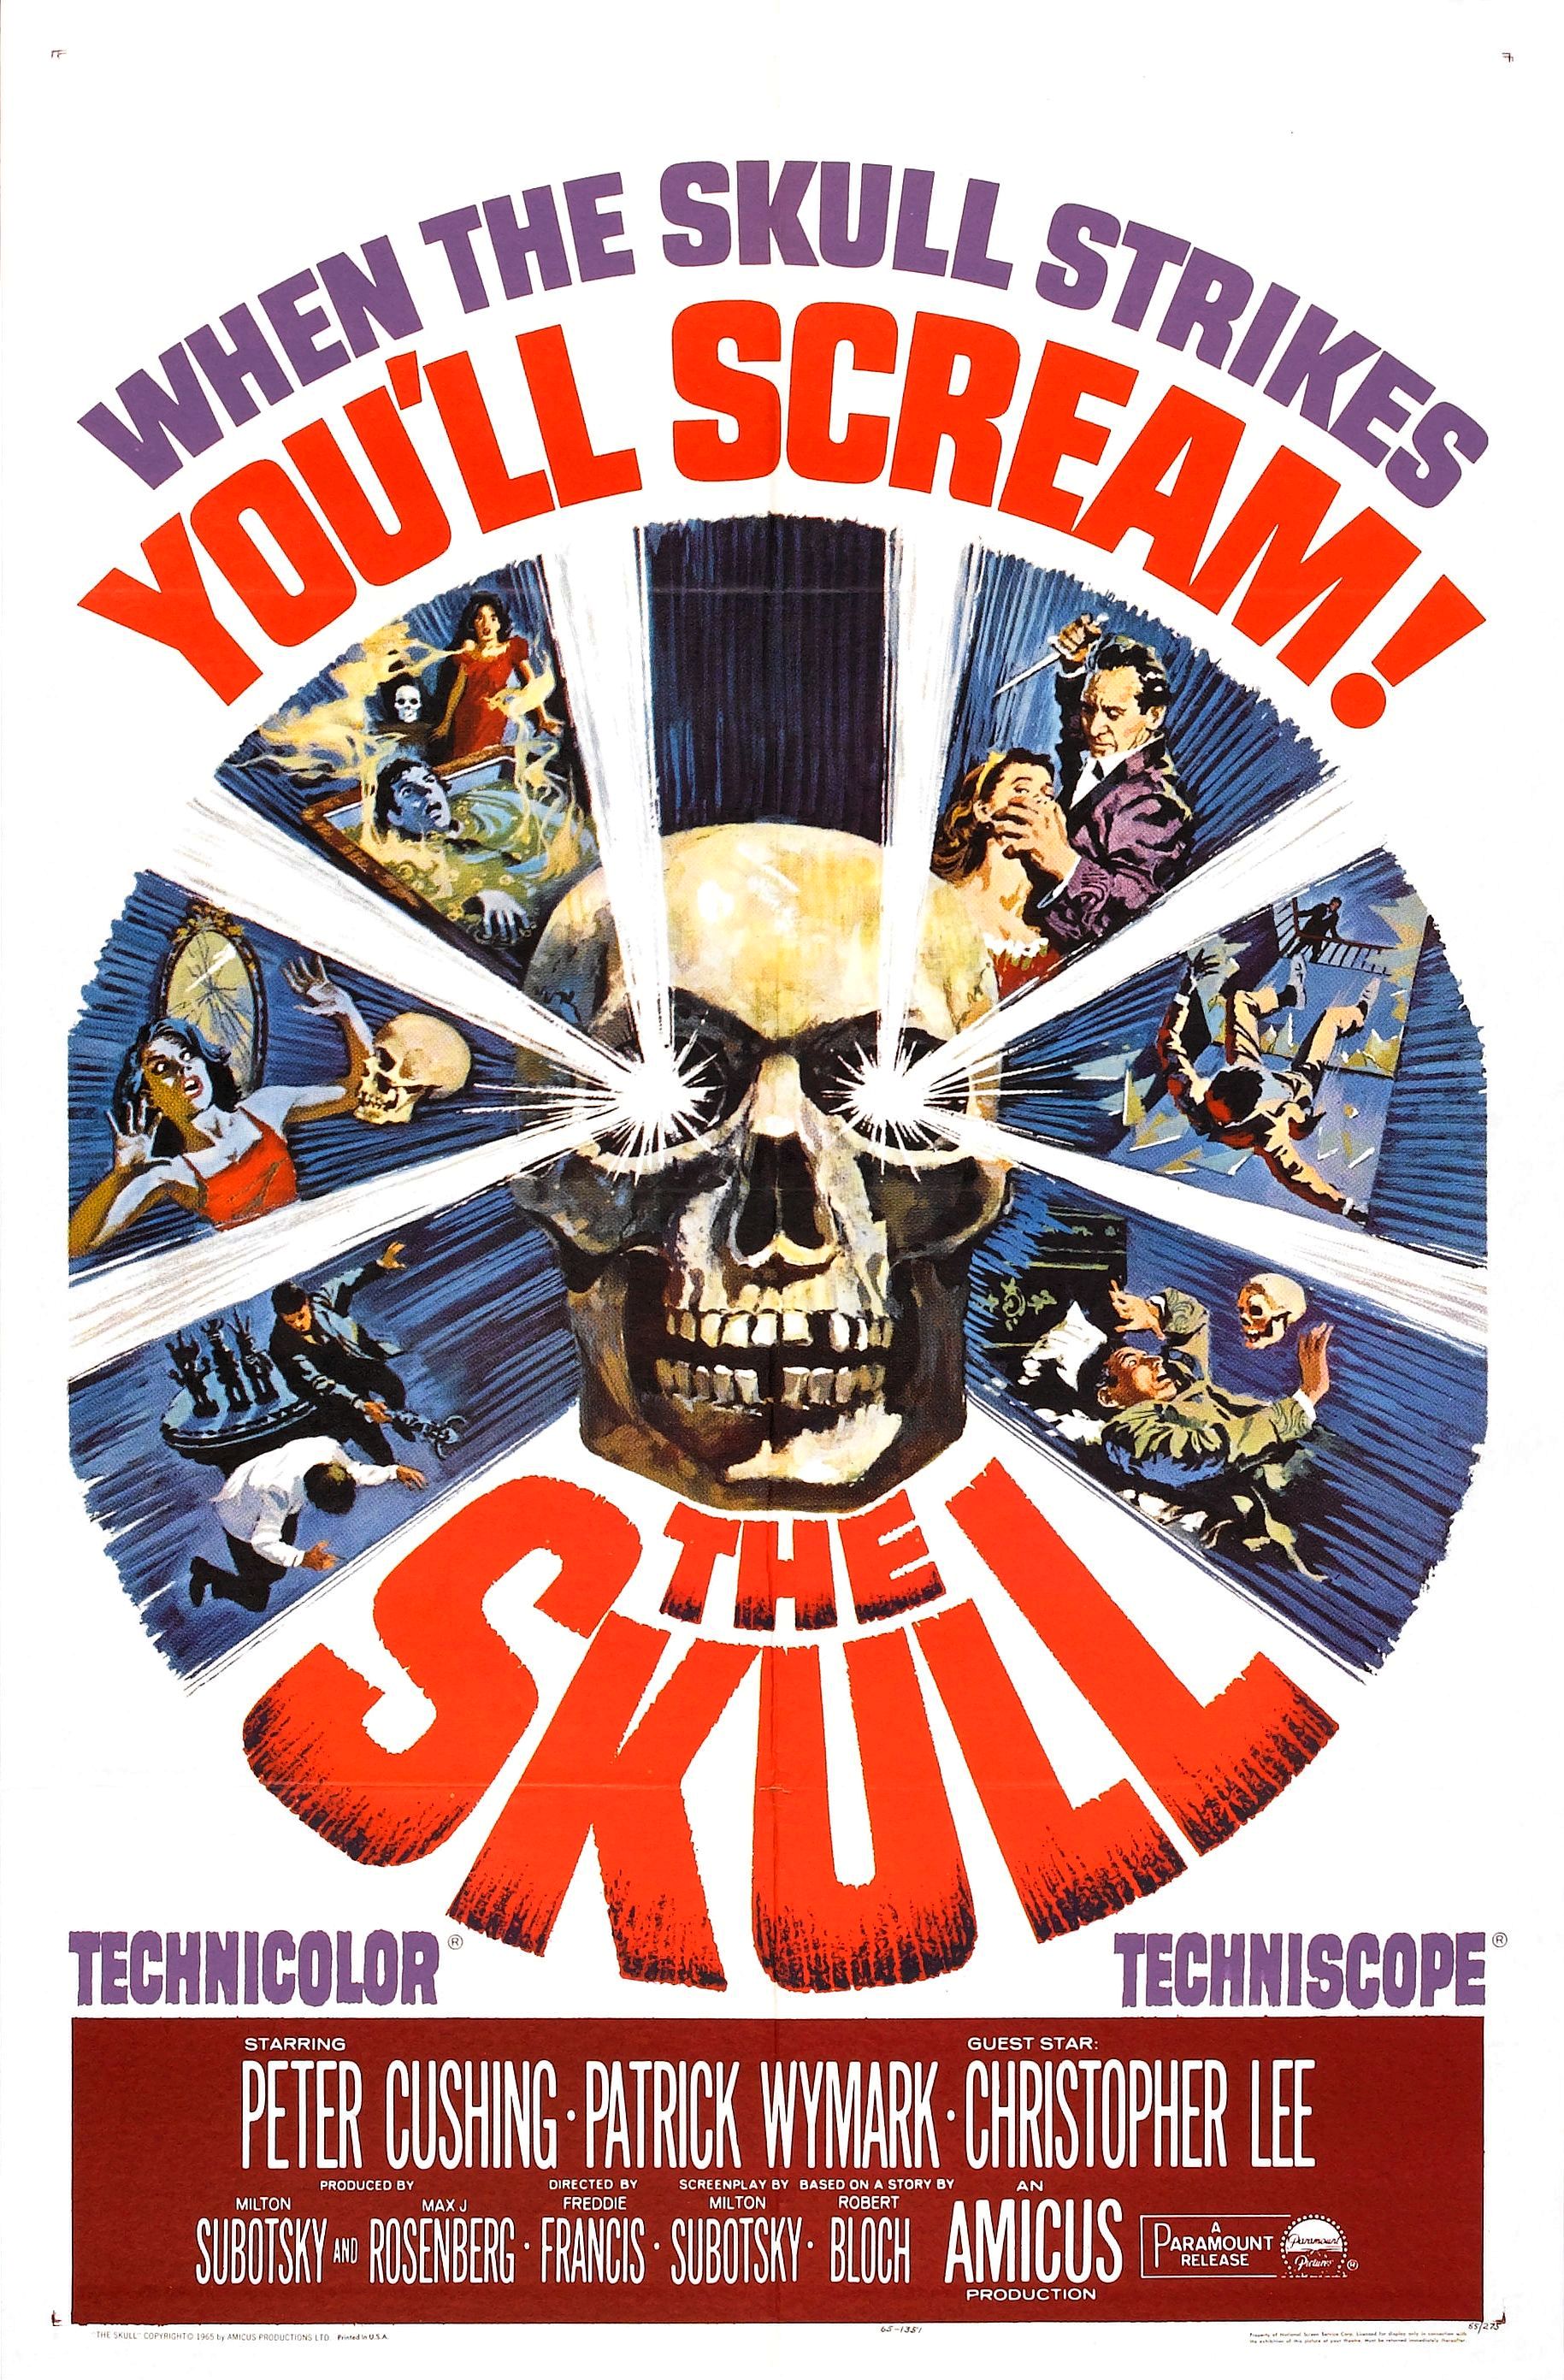 skull 1965 - Strikes Il Scre When Thes Oull Se Technicolor Techniscope Peter Cushing Patrick WymarkChristopher Lee Seg SayRoszex Francis Sifieke Rich Amicus